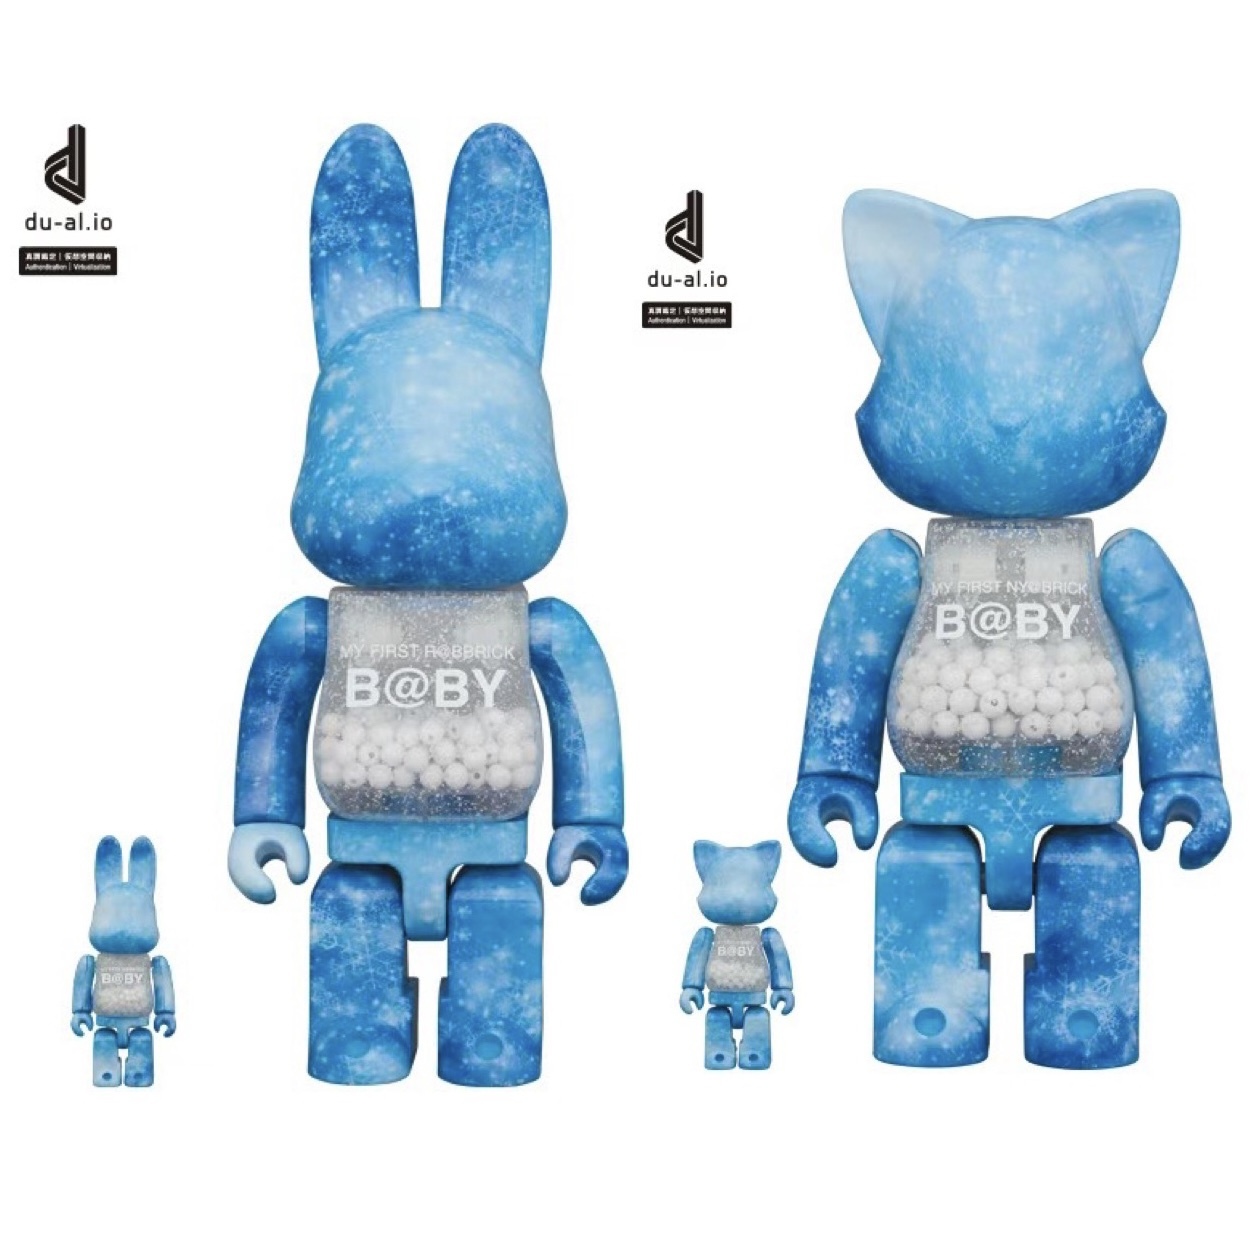 MY FIRST BE@RBRICK B@BY CRYSTAL OF SNOW キャラクターグッズ ...